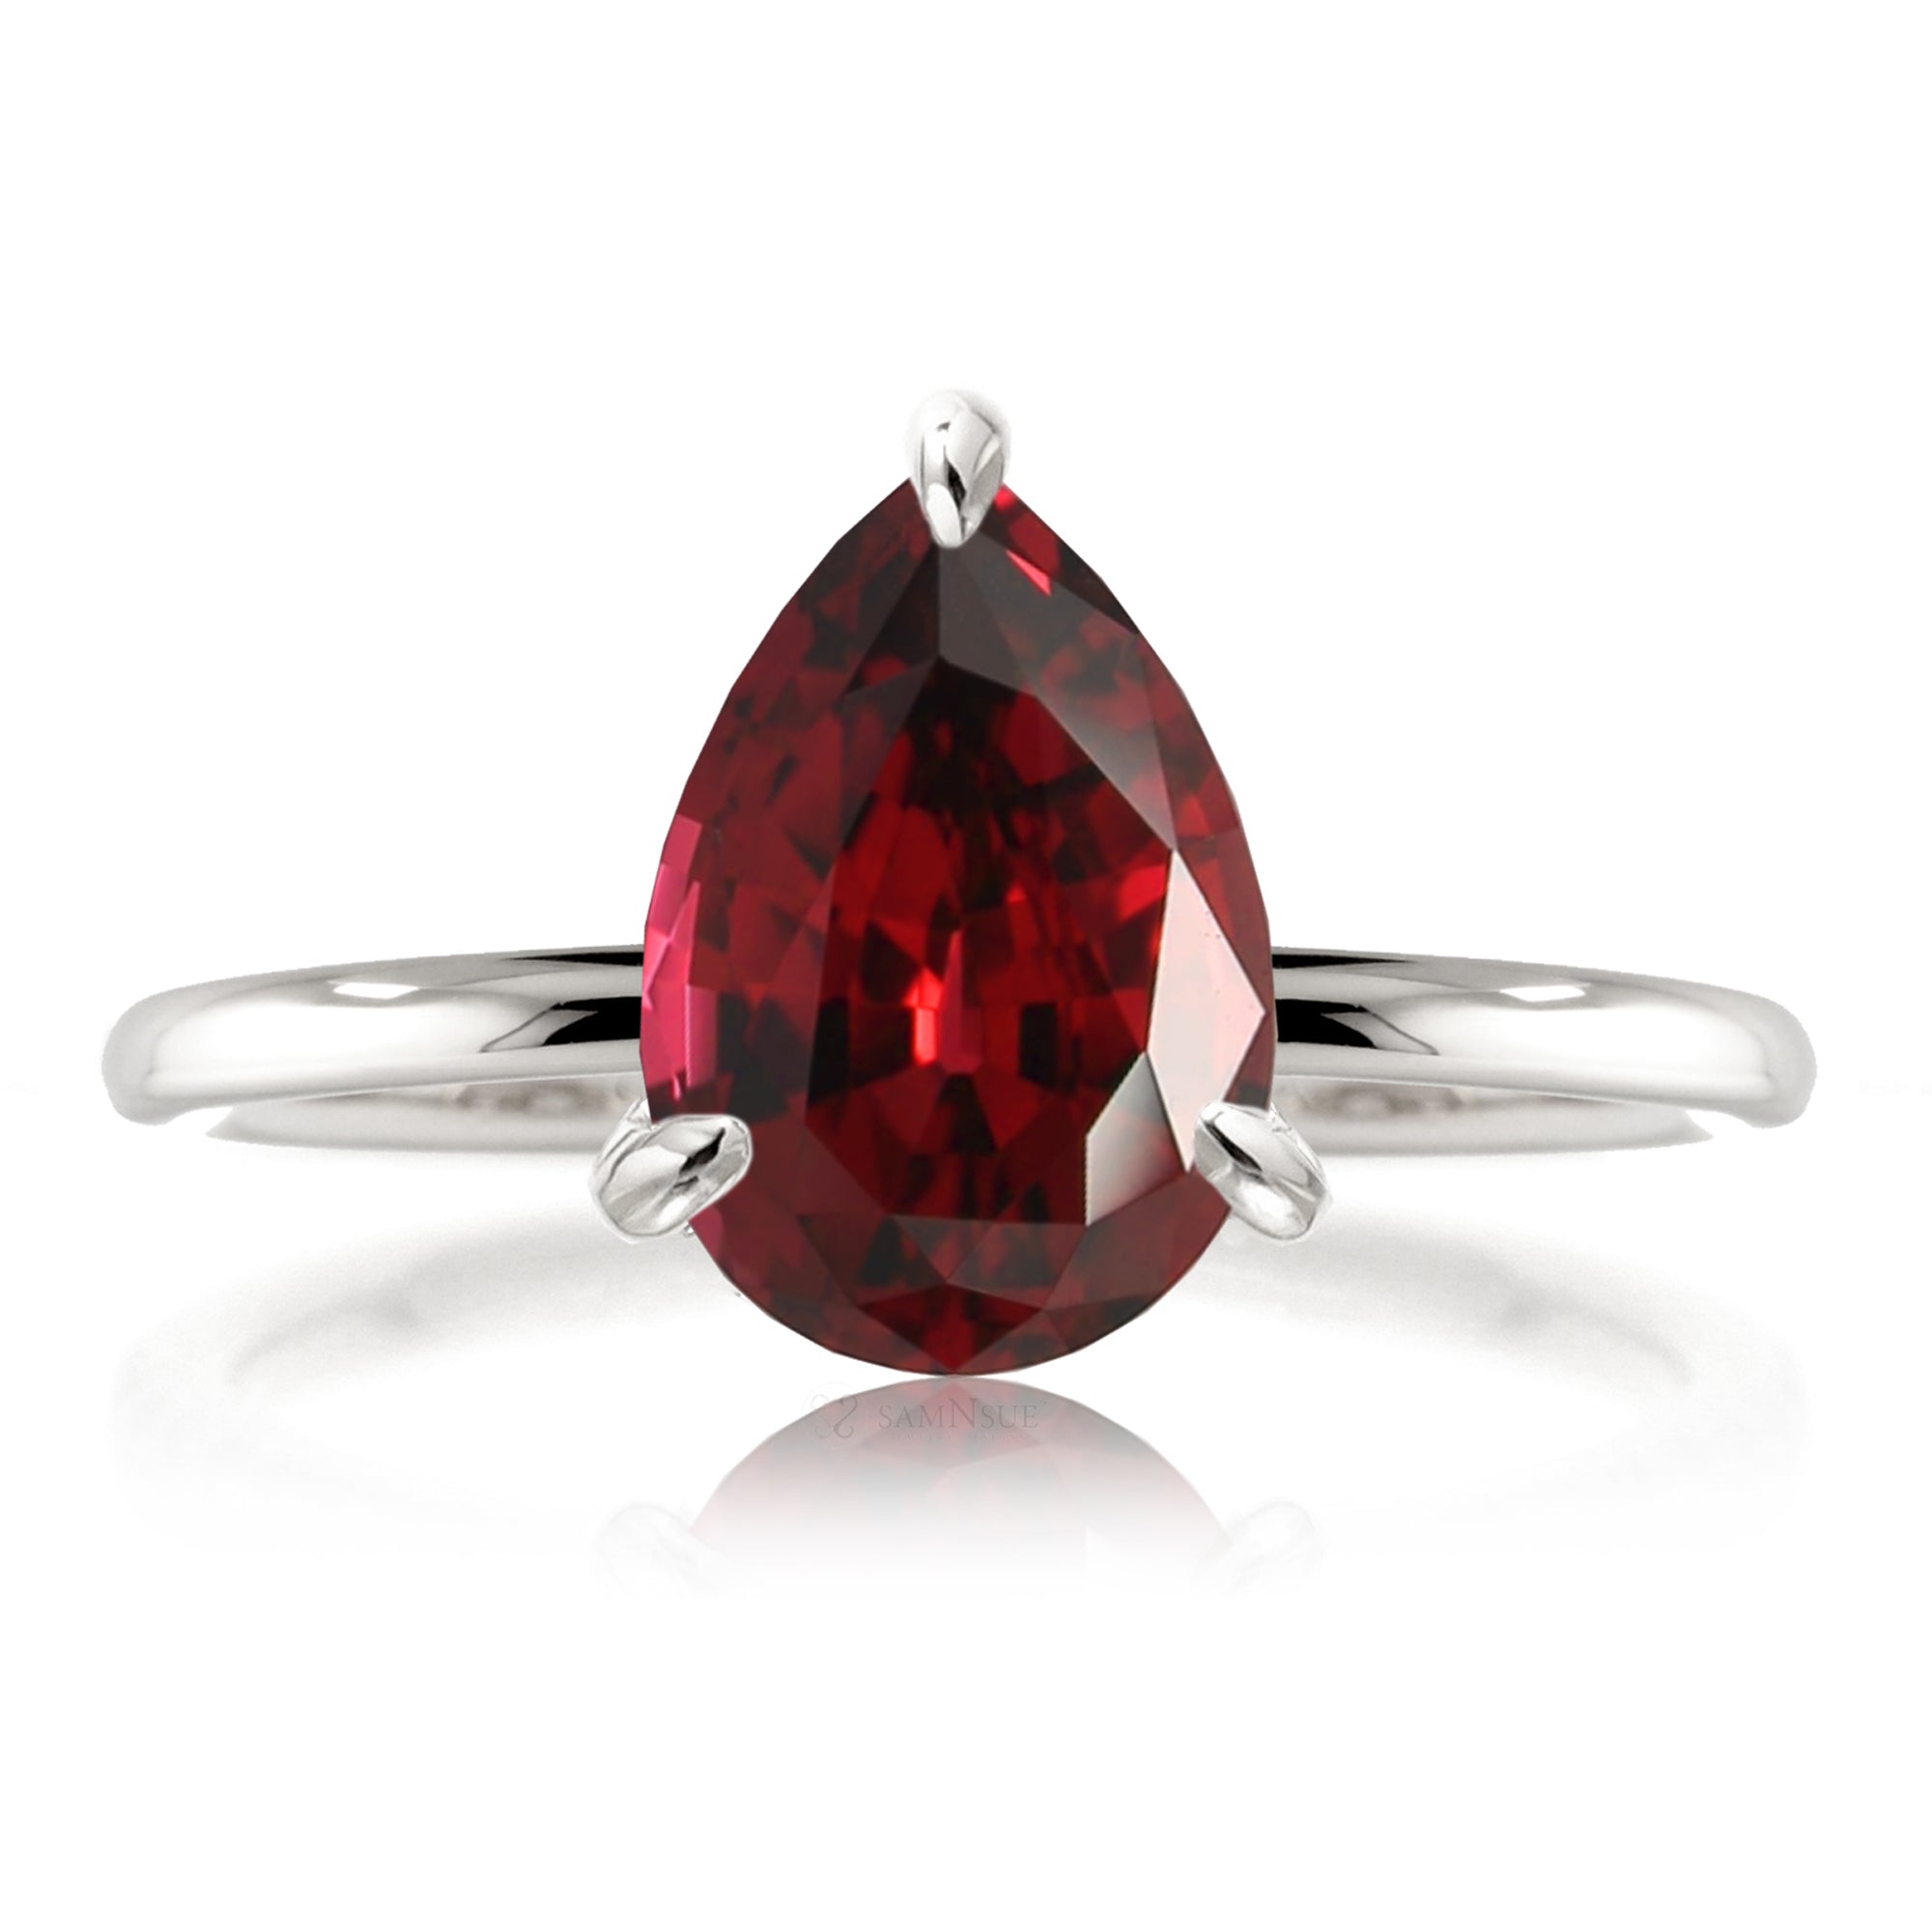 Pear cut lab-grown ruby engagement ring solid band white gold - the Ava